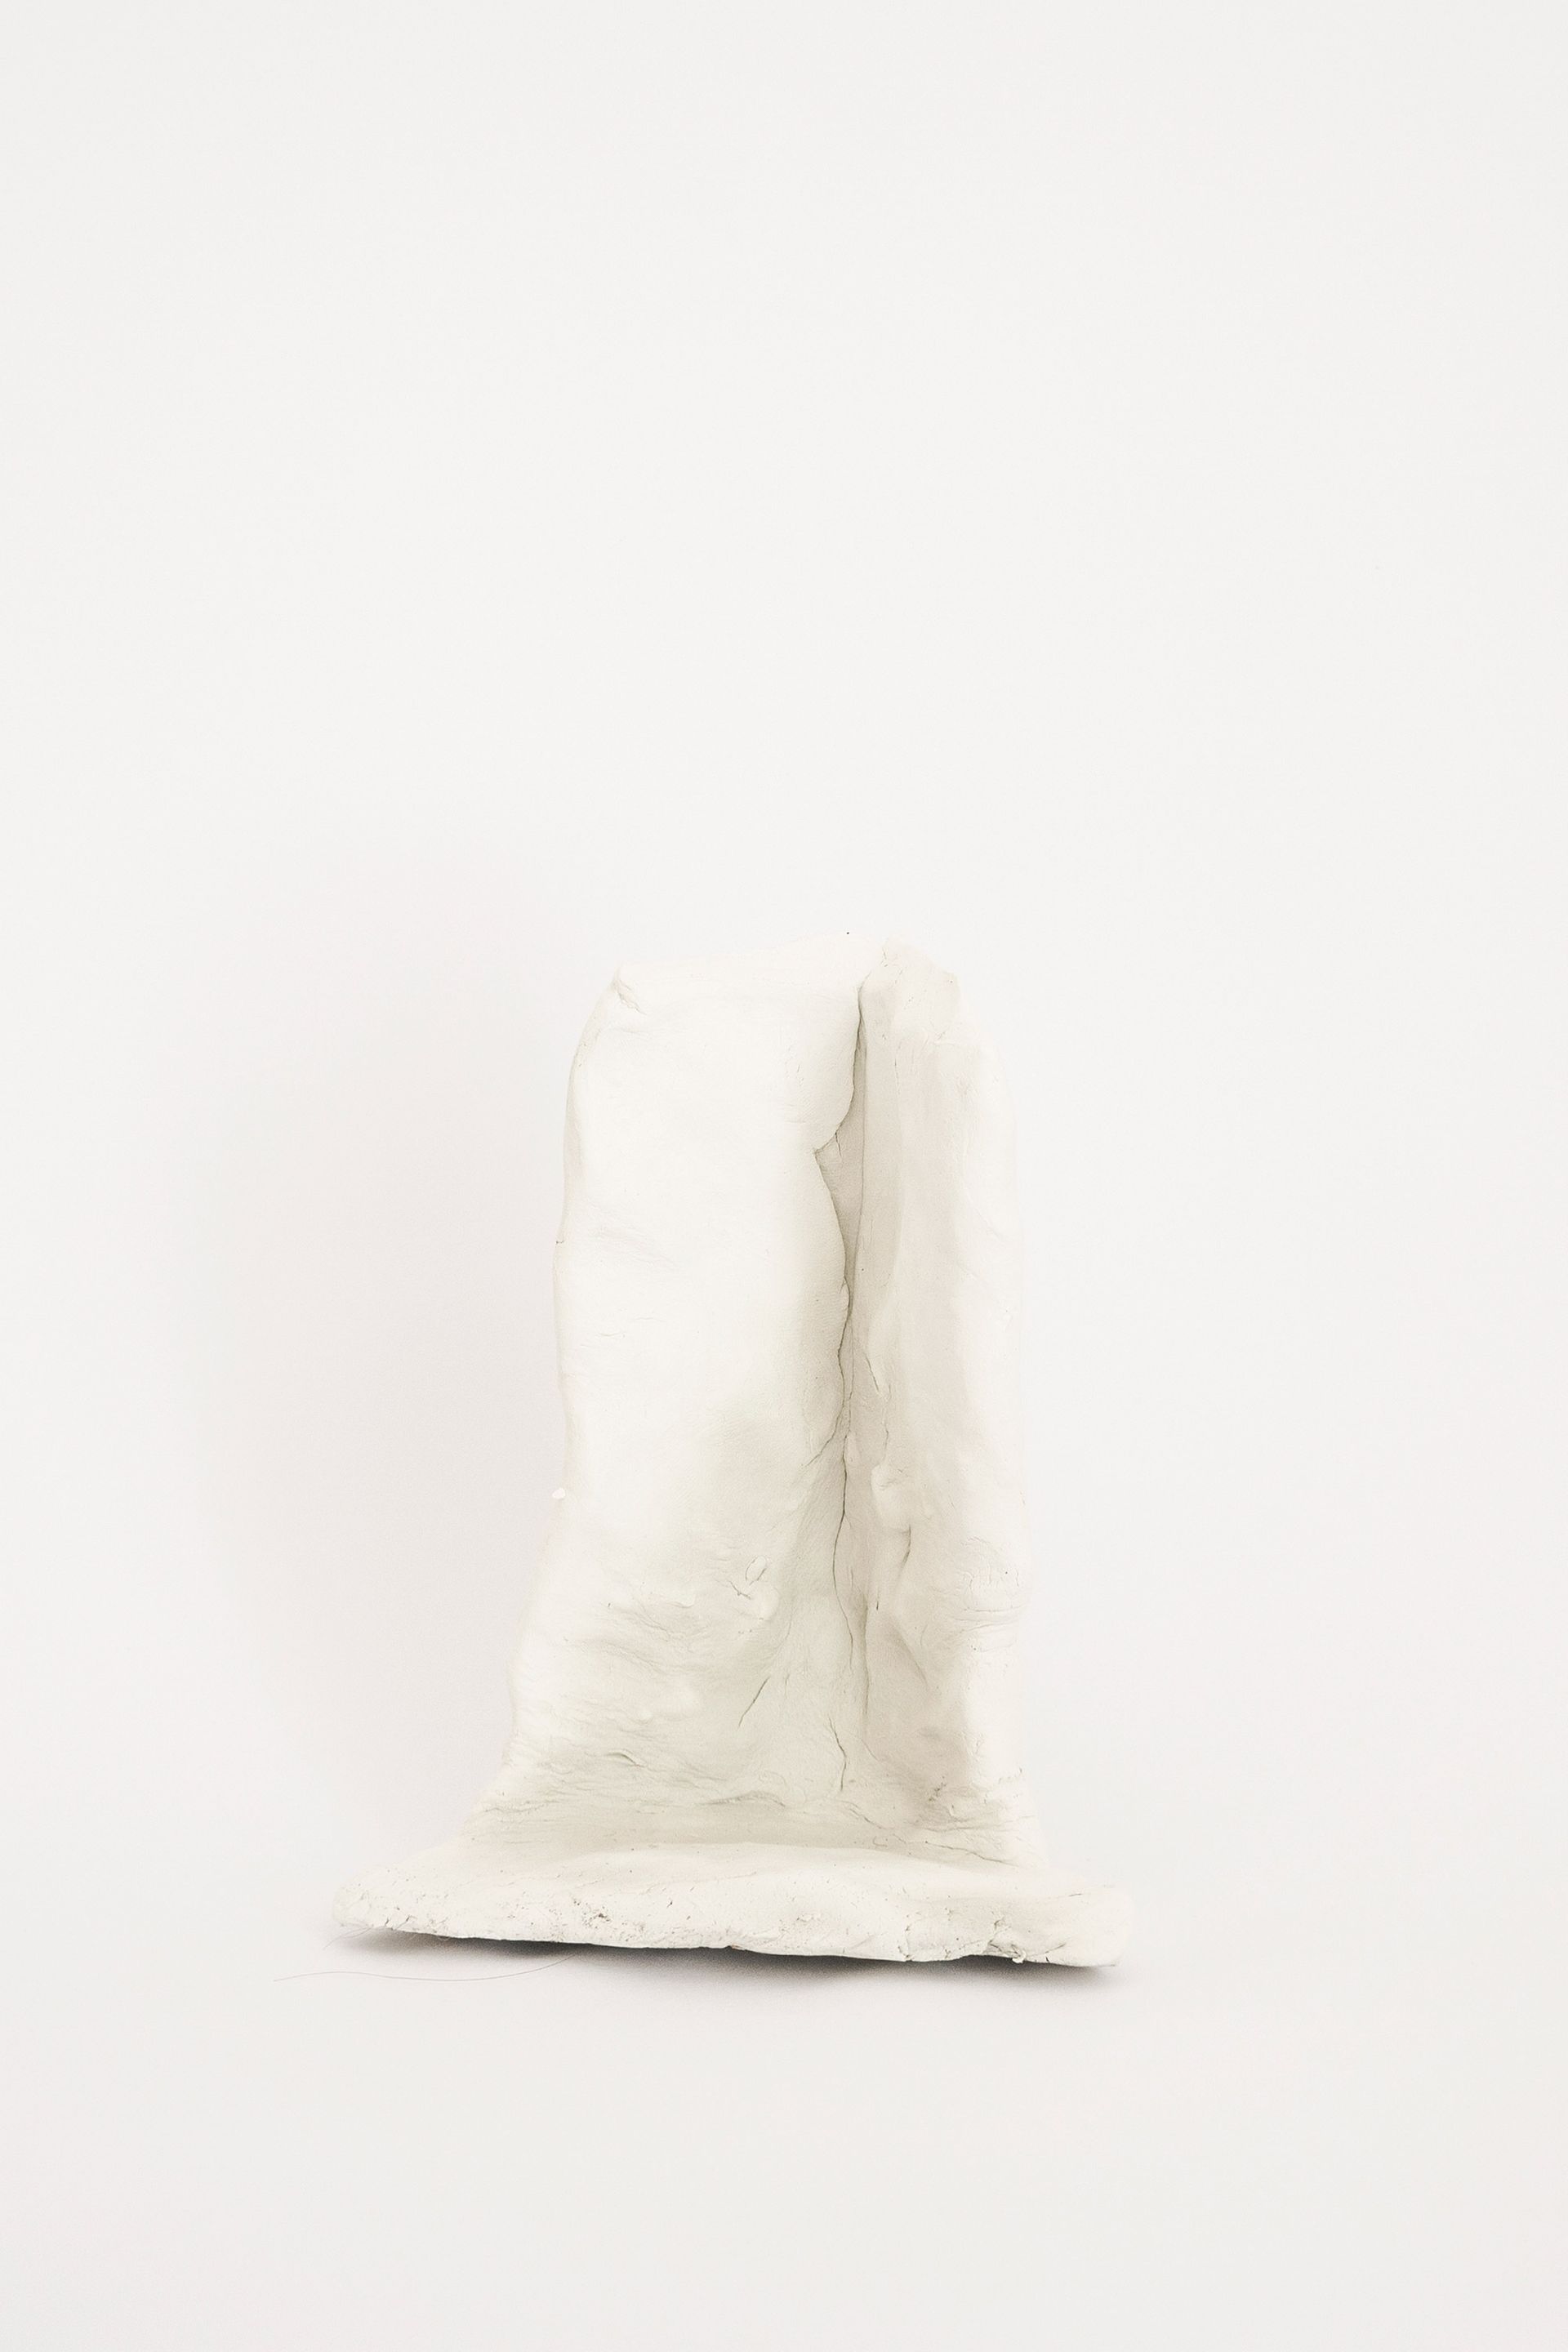 Corners for Relief (No. 5), 2019, Sculpting Clay, Filth, 16 × 12 × 11 cm. These small corner-shaped sculptures are modelled forms of popular peeing corners from public space and can be considered anti-monuments to this topic: Peeing corners may be a result of the lack of public toilets, but they still owe to the fact that ‘men can’ and are a demonstration of male privilege within the public sphere.